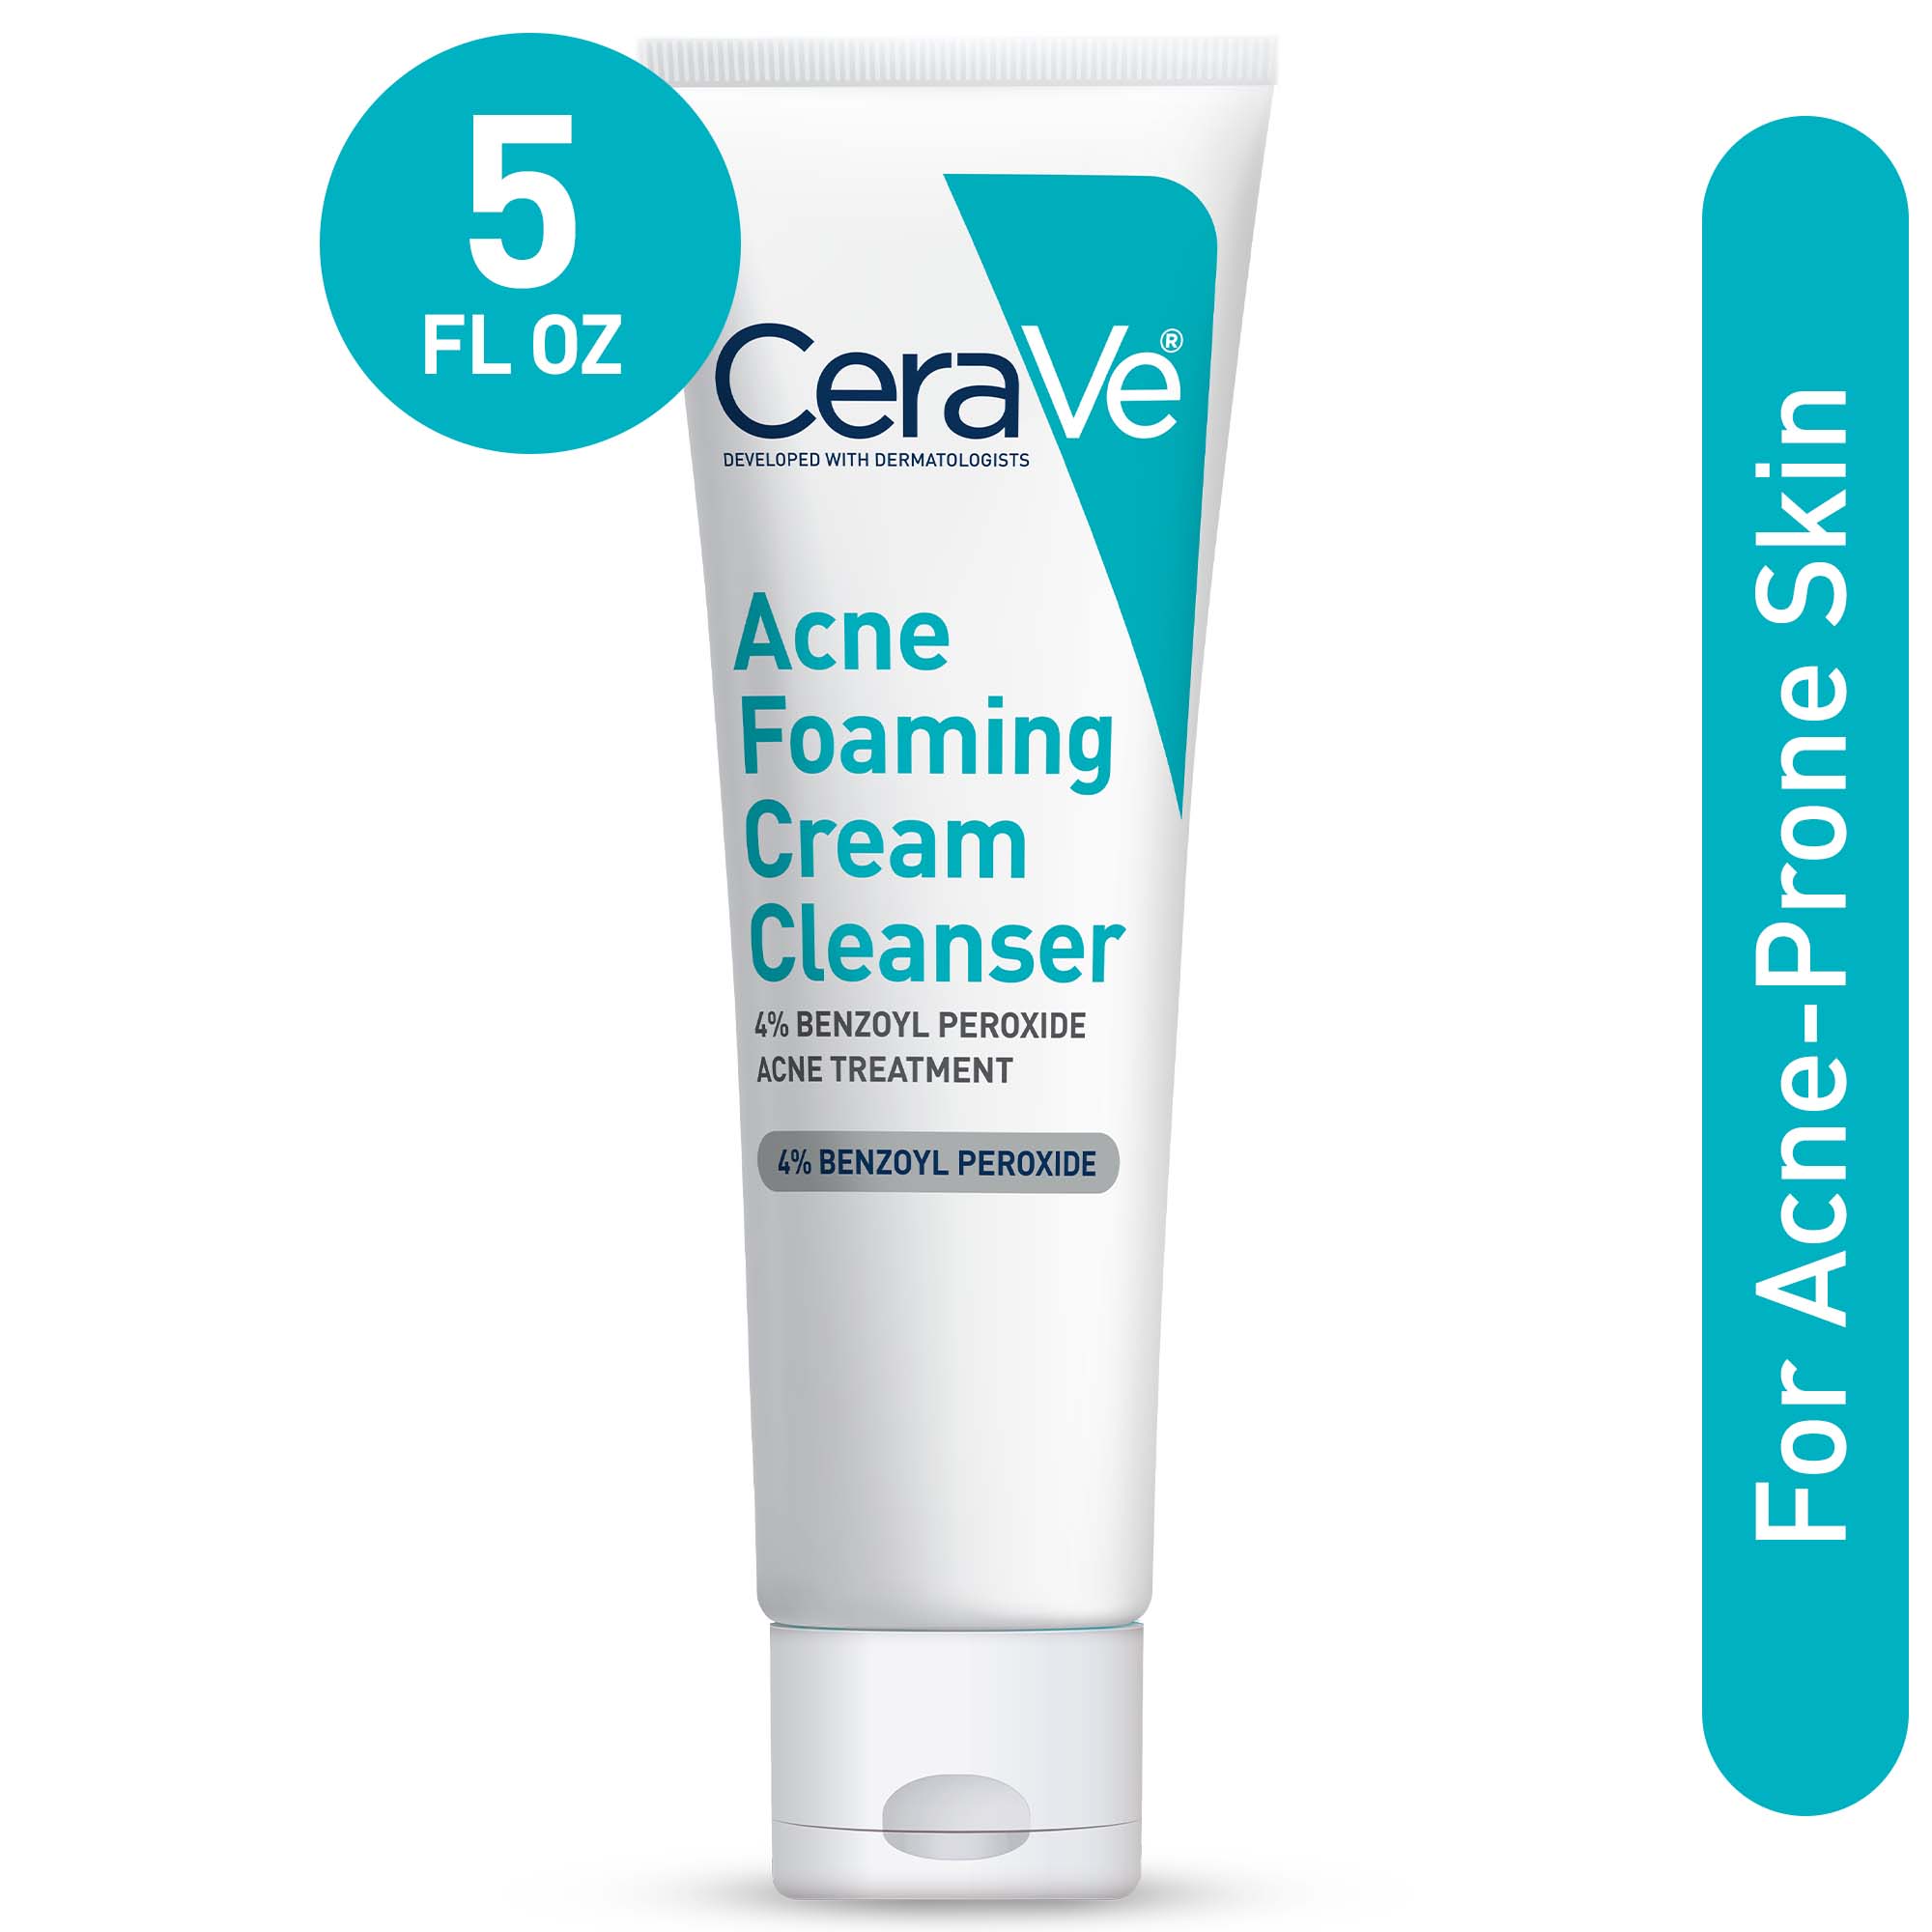 CeraVe Acne Foaming Cream Cleanser with 4% Benzoyl Peroxide for Face, 5 oz - image 1 of 19